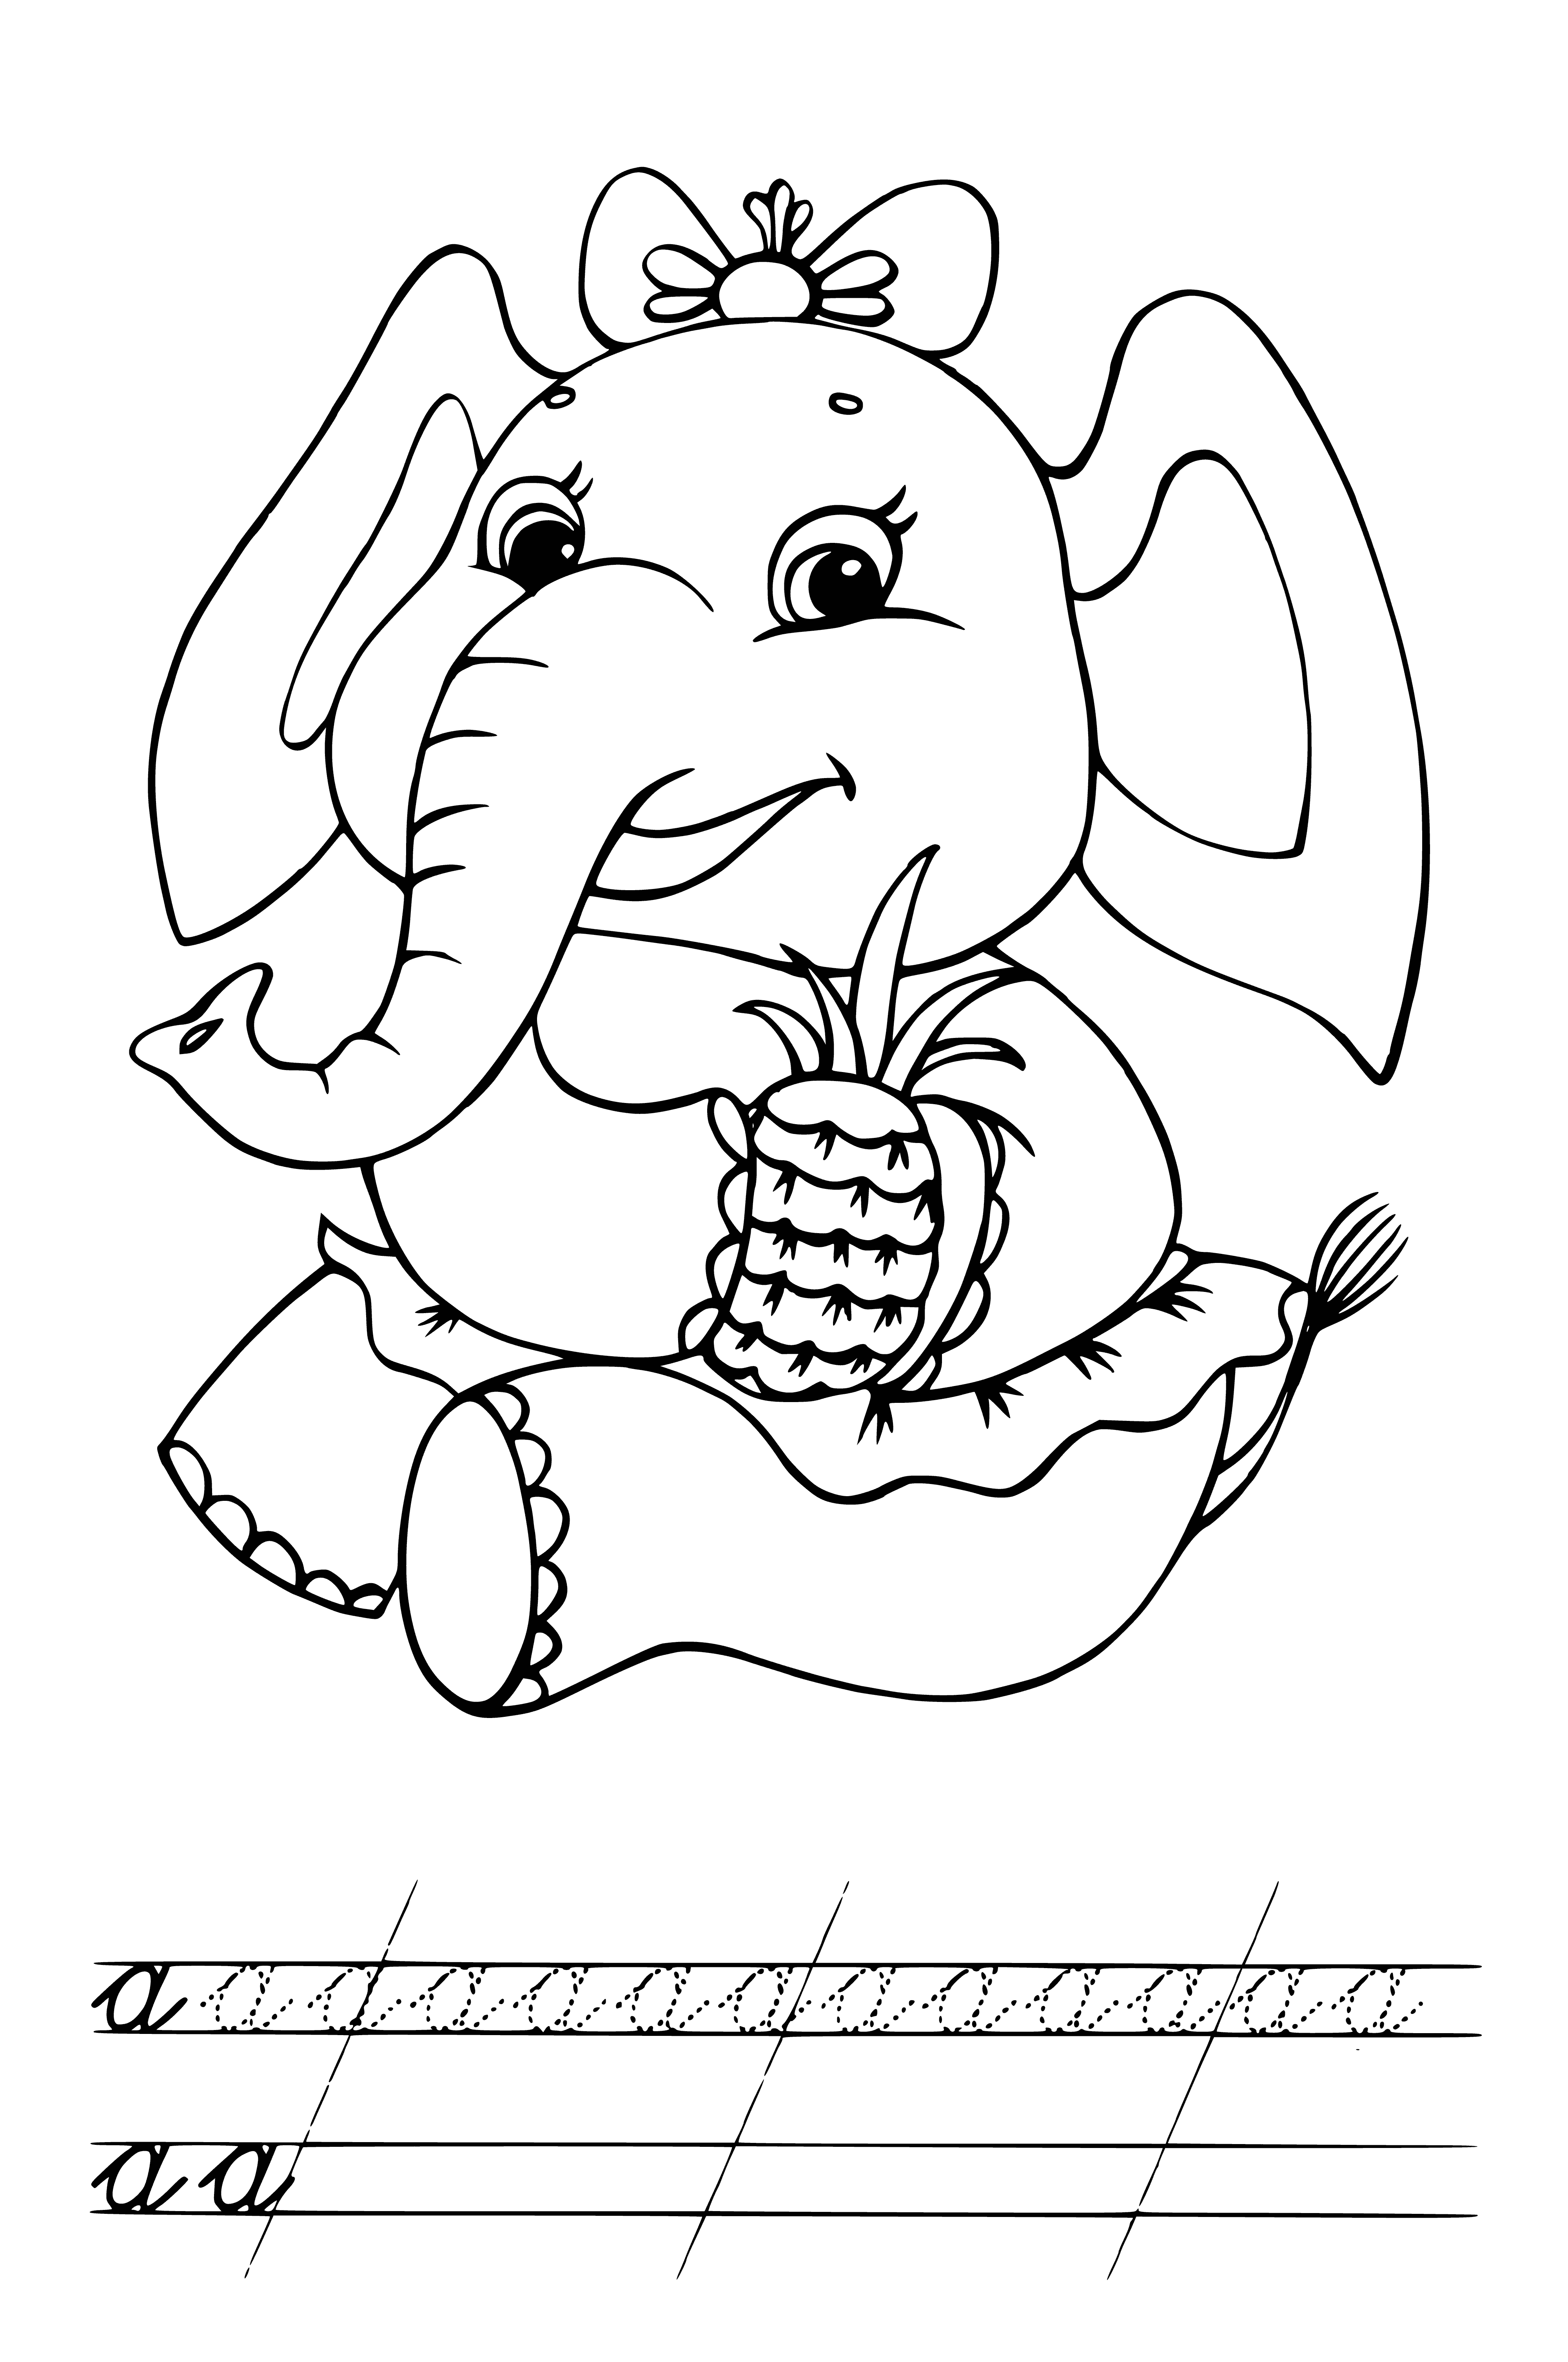 coloring page: Happy elephant stands in grassy patch with trees in background, trunk raised towards viewer.